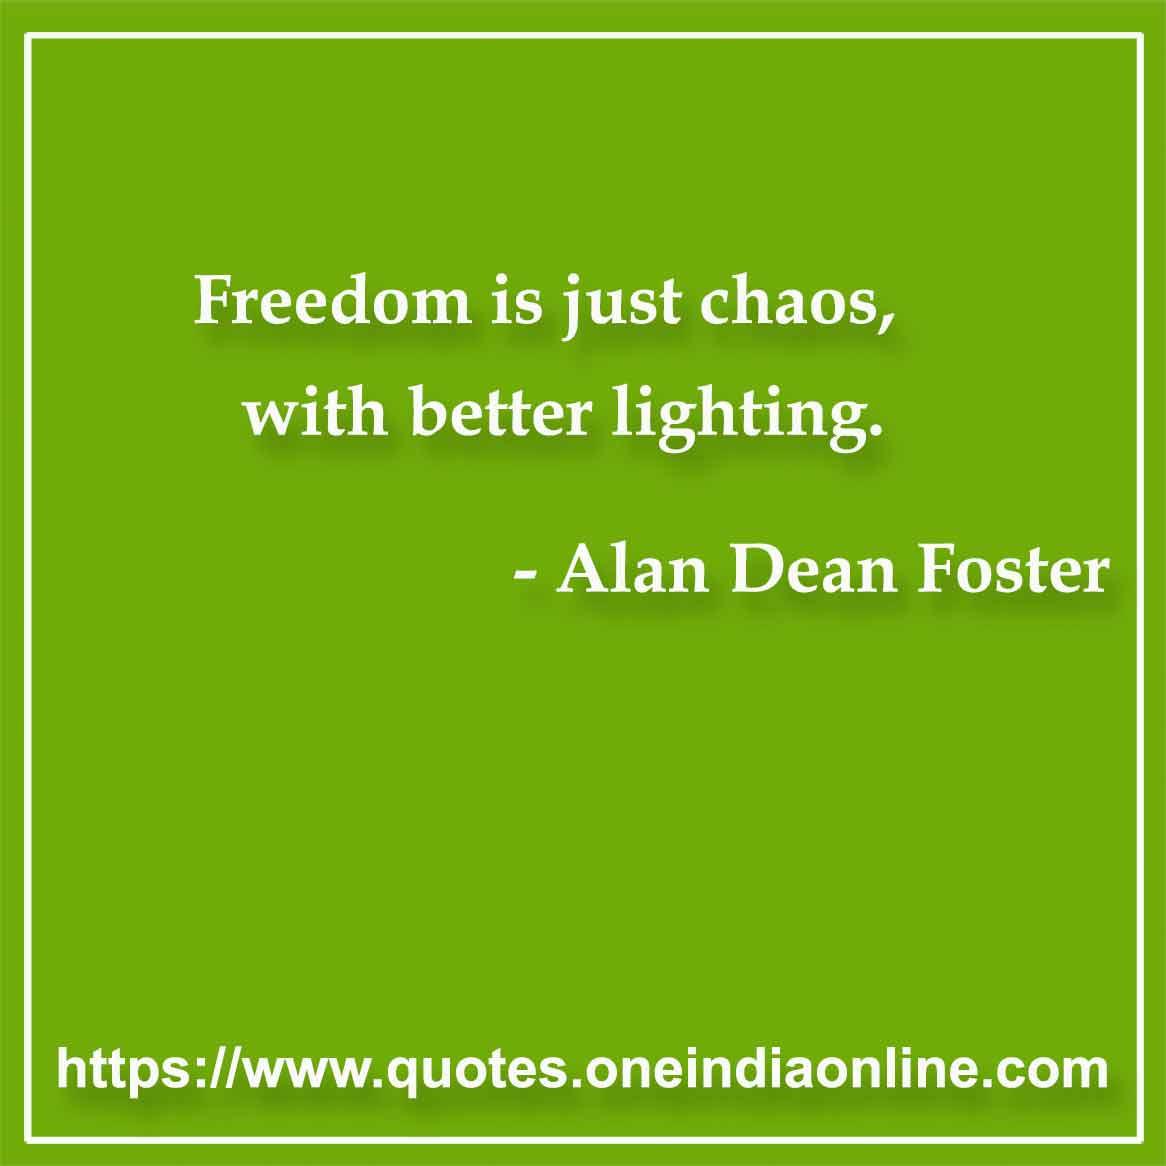 Freedom is just chaos, with better lighting.

- Freedom Quotes by Alan Dean Foster